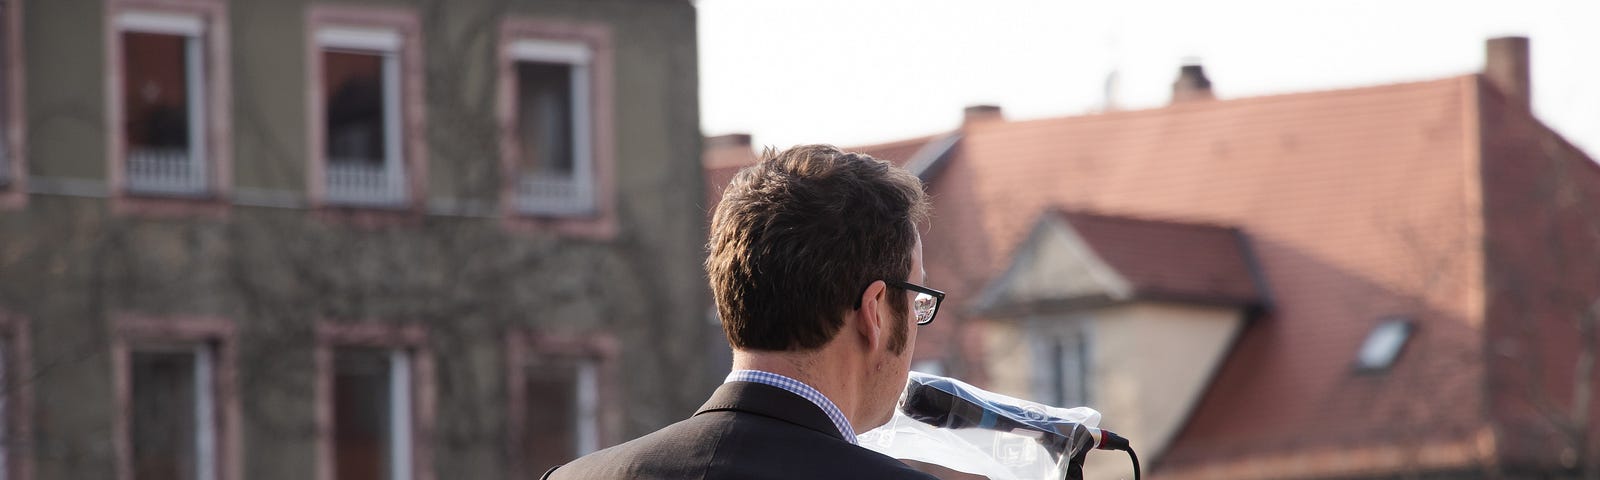 the back of a man in a black suit in the foreground, standing behind a mic, giving a speech, with buildings in the background